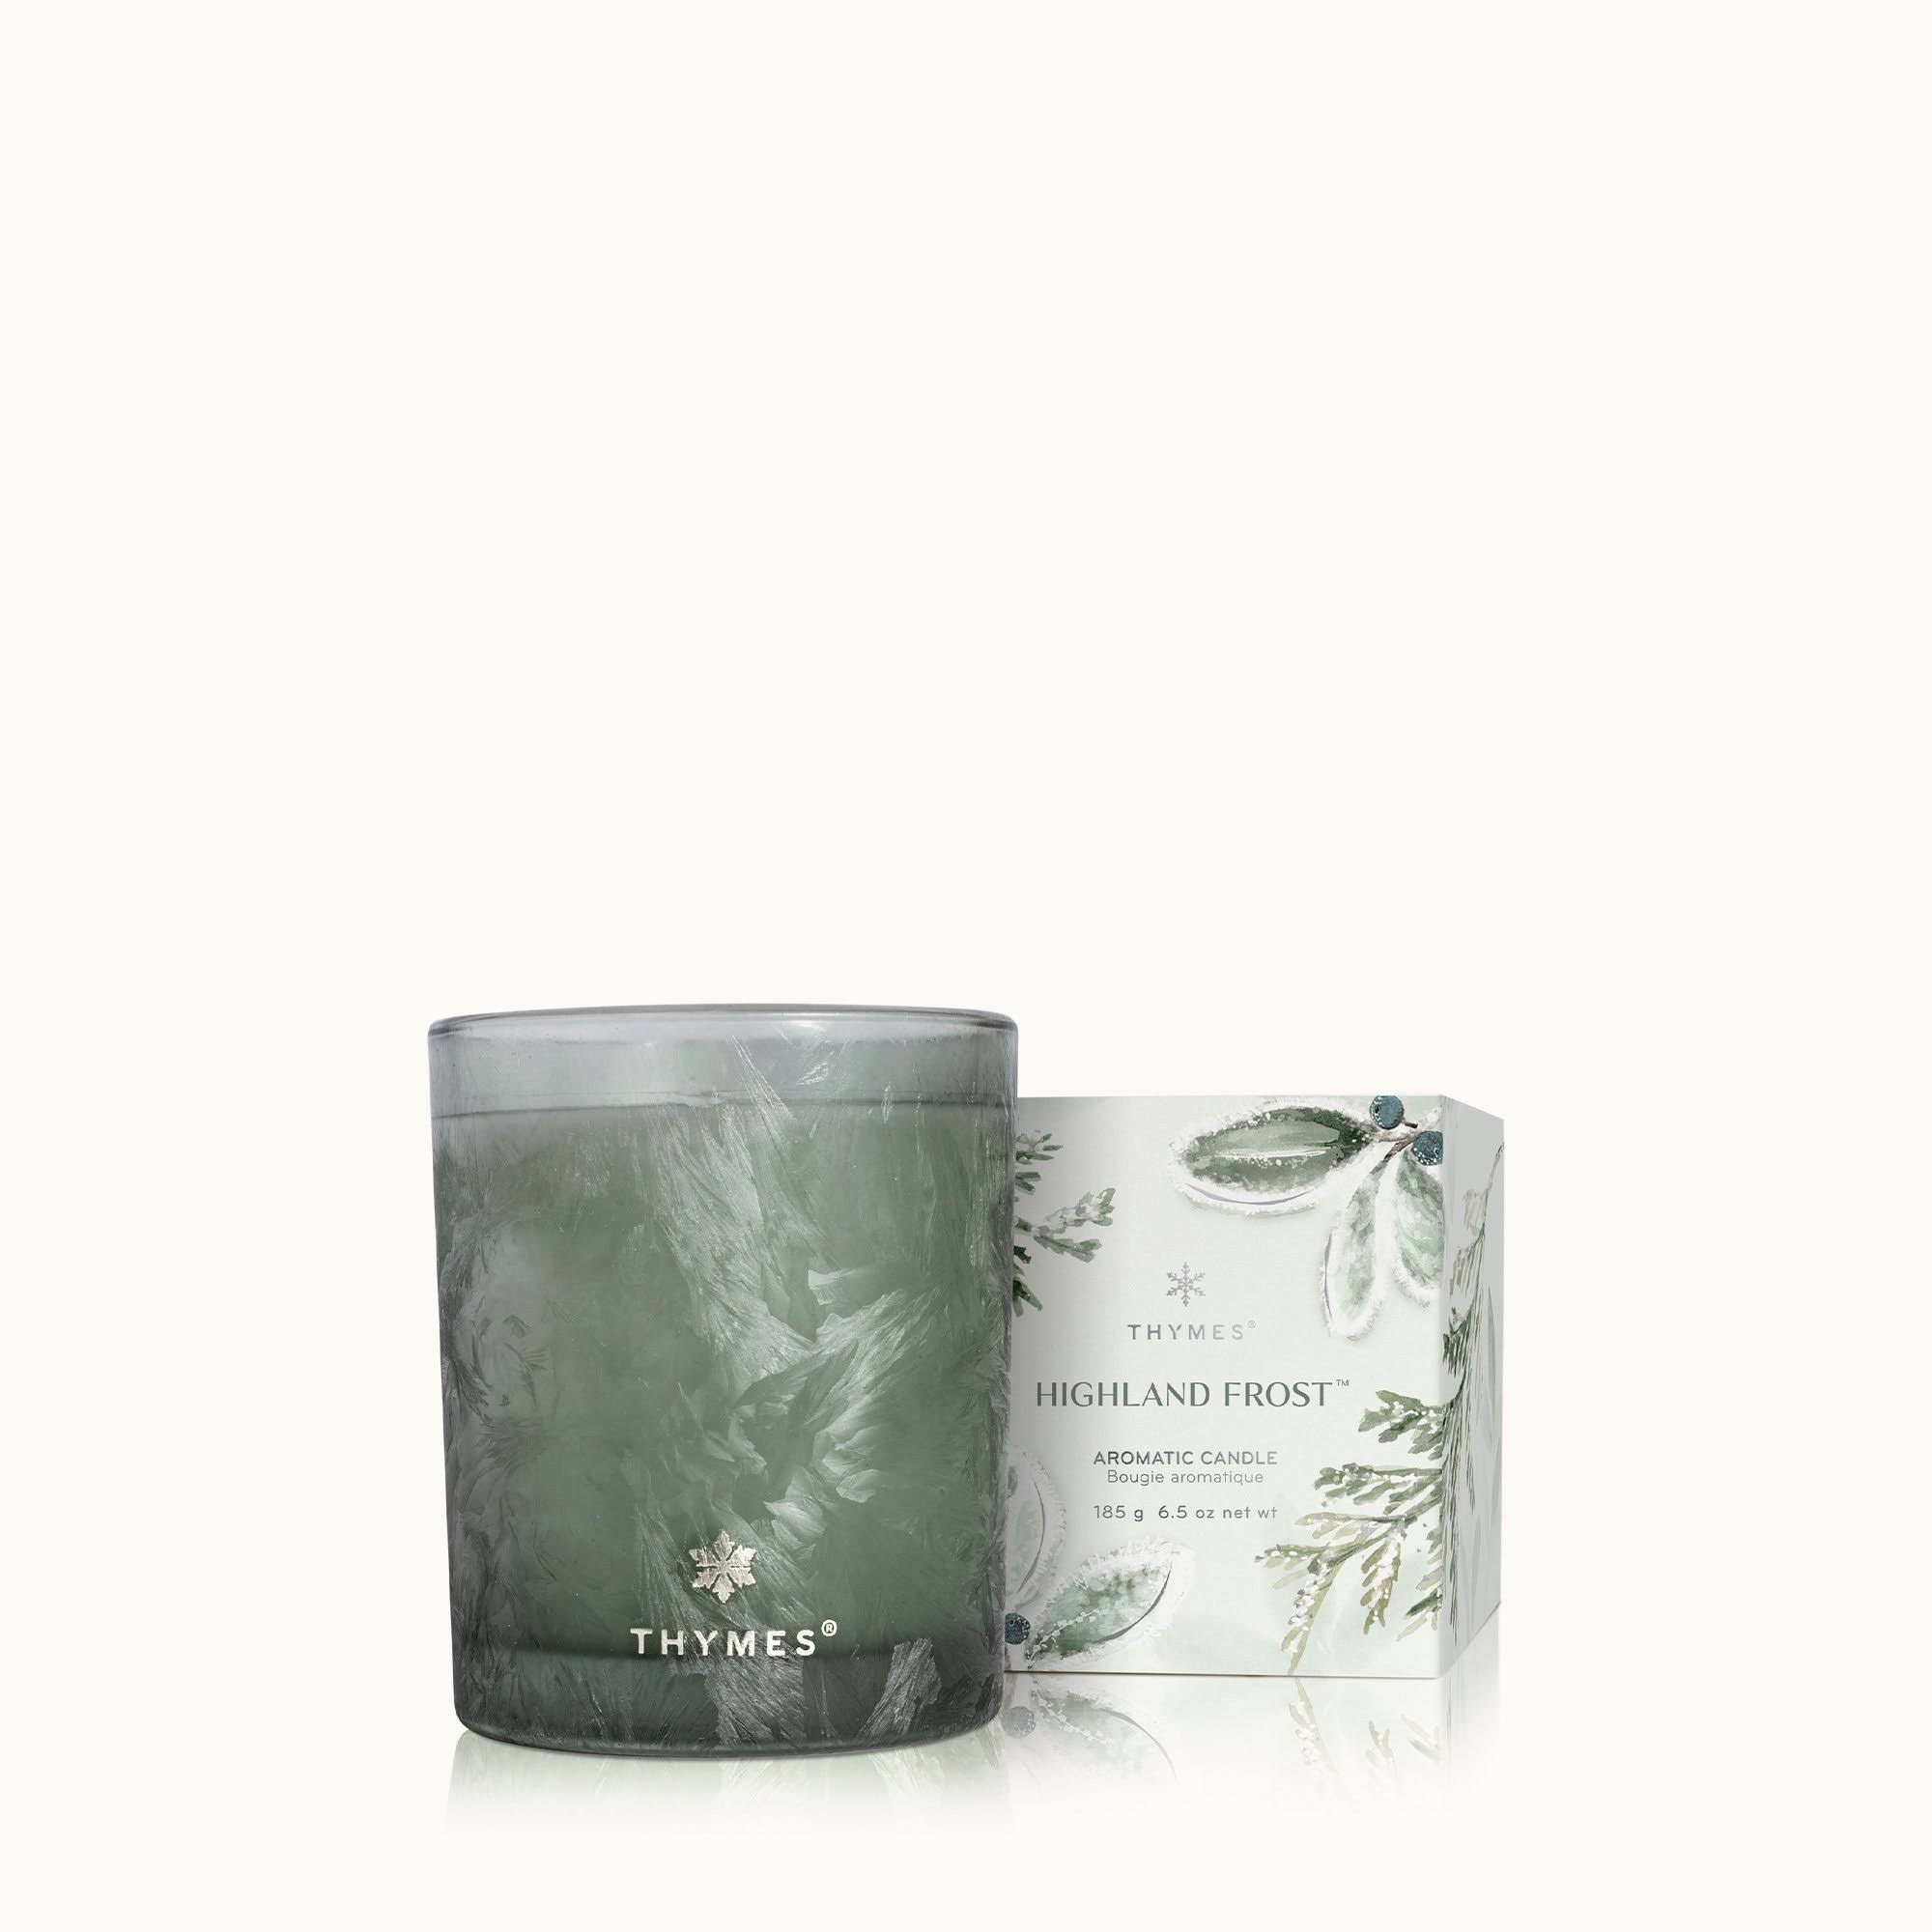 Thymes Highland Frost Boxed Candle - 6.5 oz